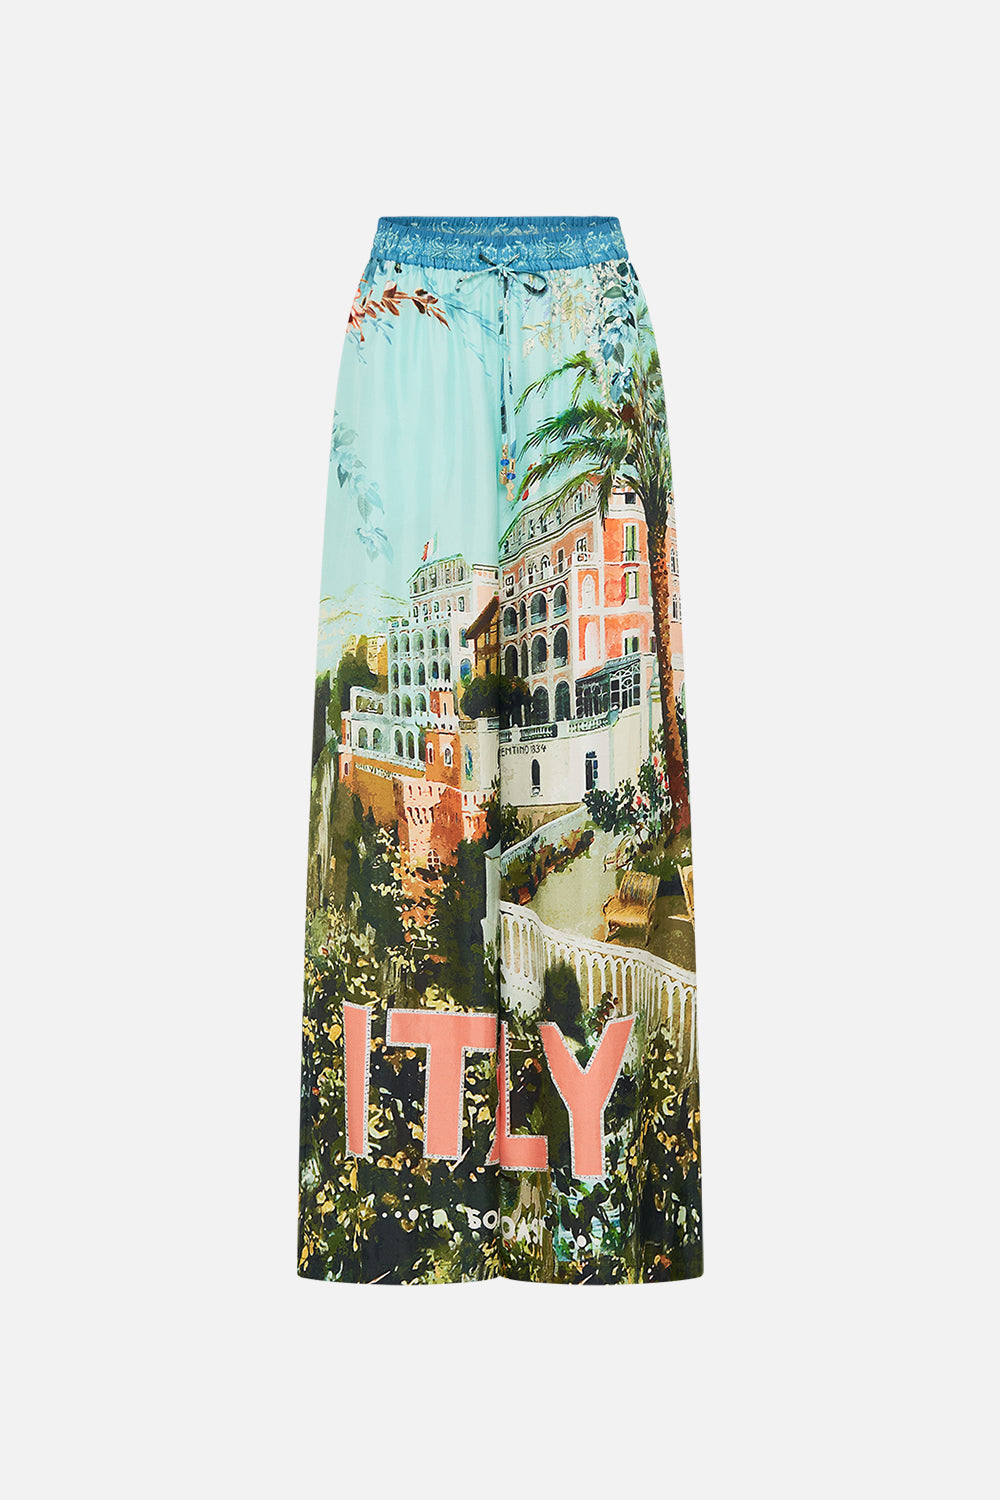 Product view of CAMILLA silklounge pant in From Sorrento With Love print